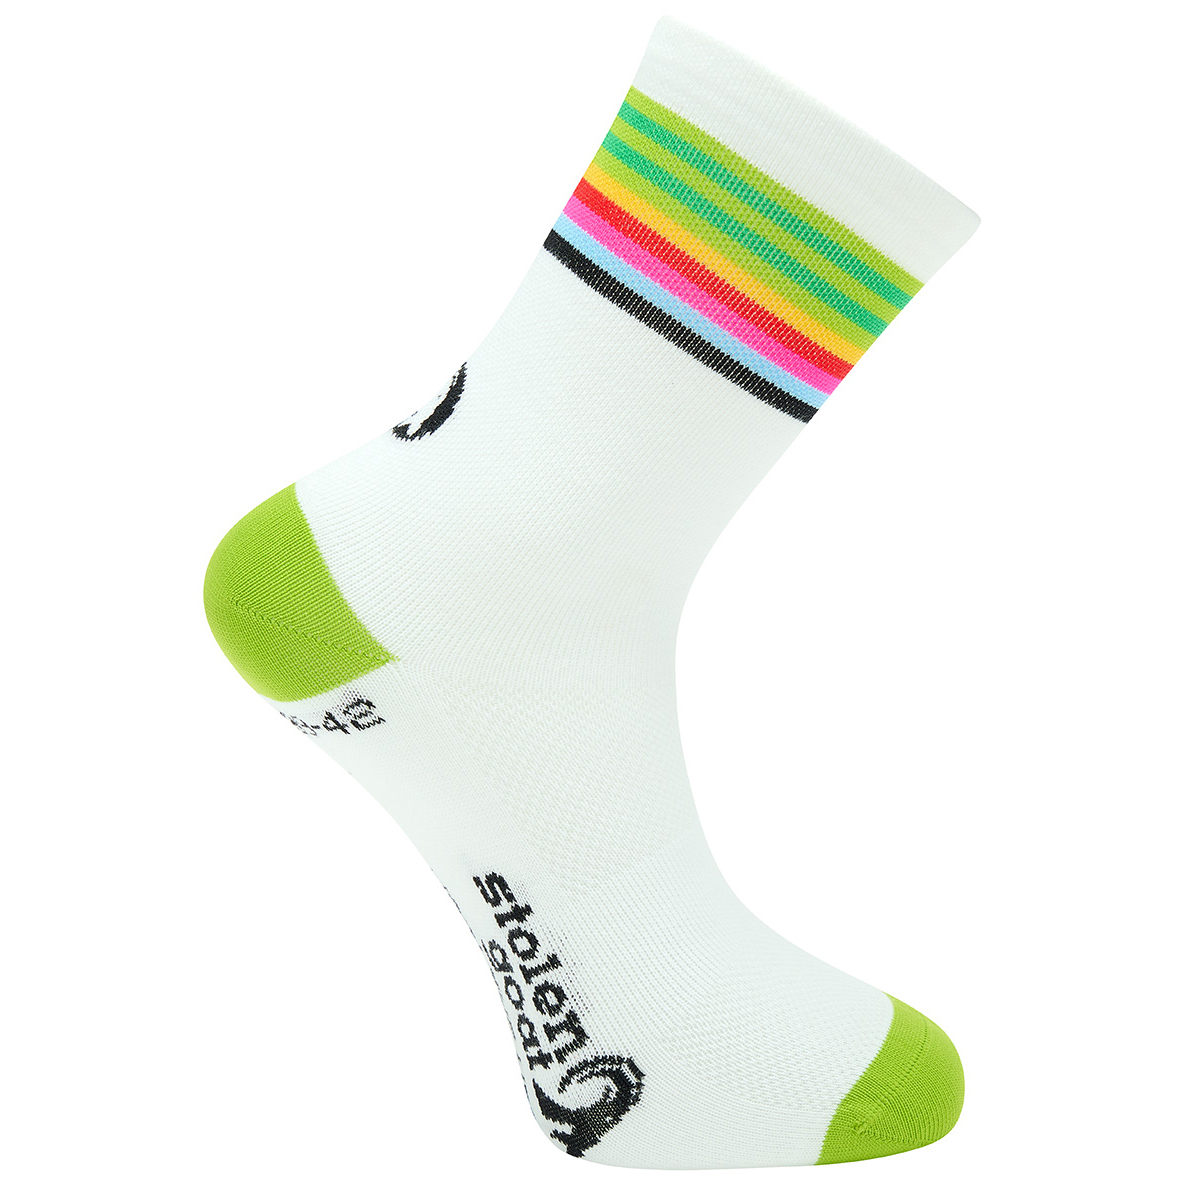 Stolen Goat Lithium crew length cycling socks white with green toe and heel and multi stripe at ankle